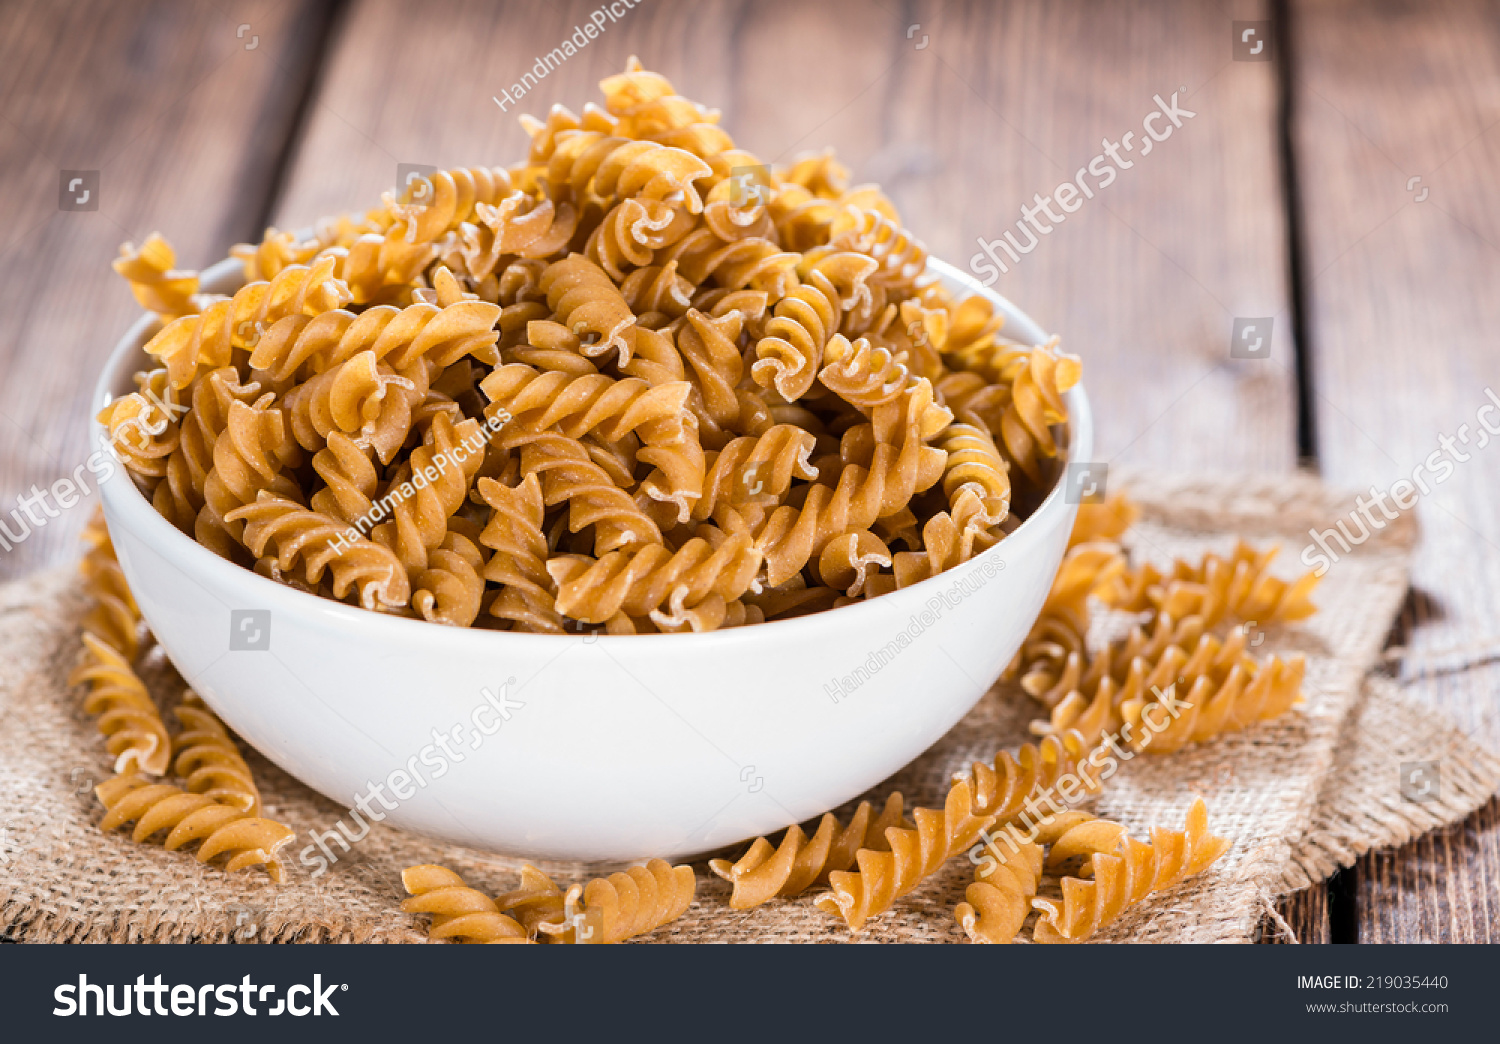 Portion of uncooked Wholemeal Fussili on wooden background #219035440